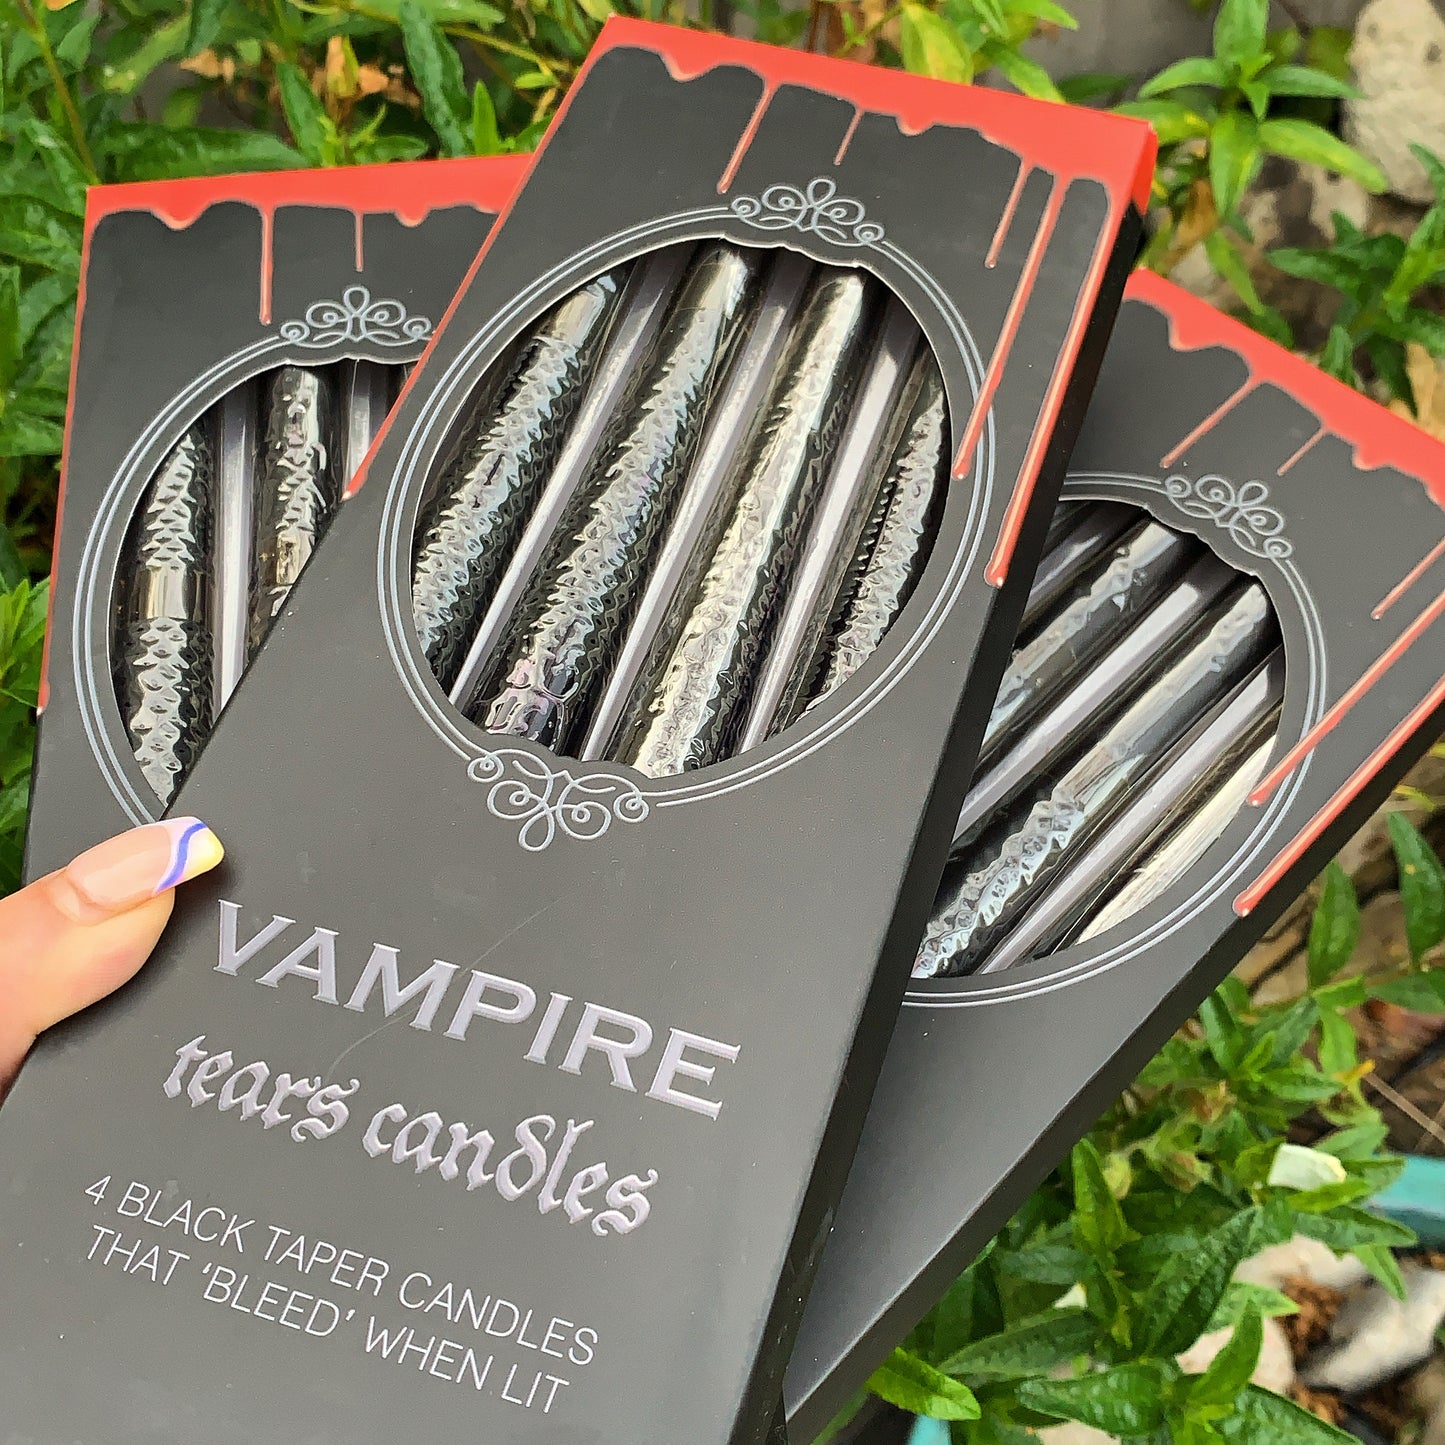 Pack of 4 Vampire Tears Candles